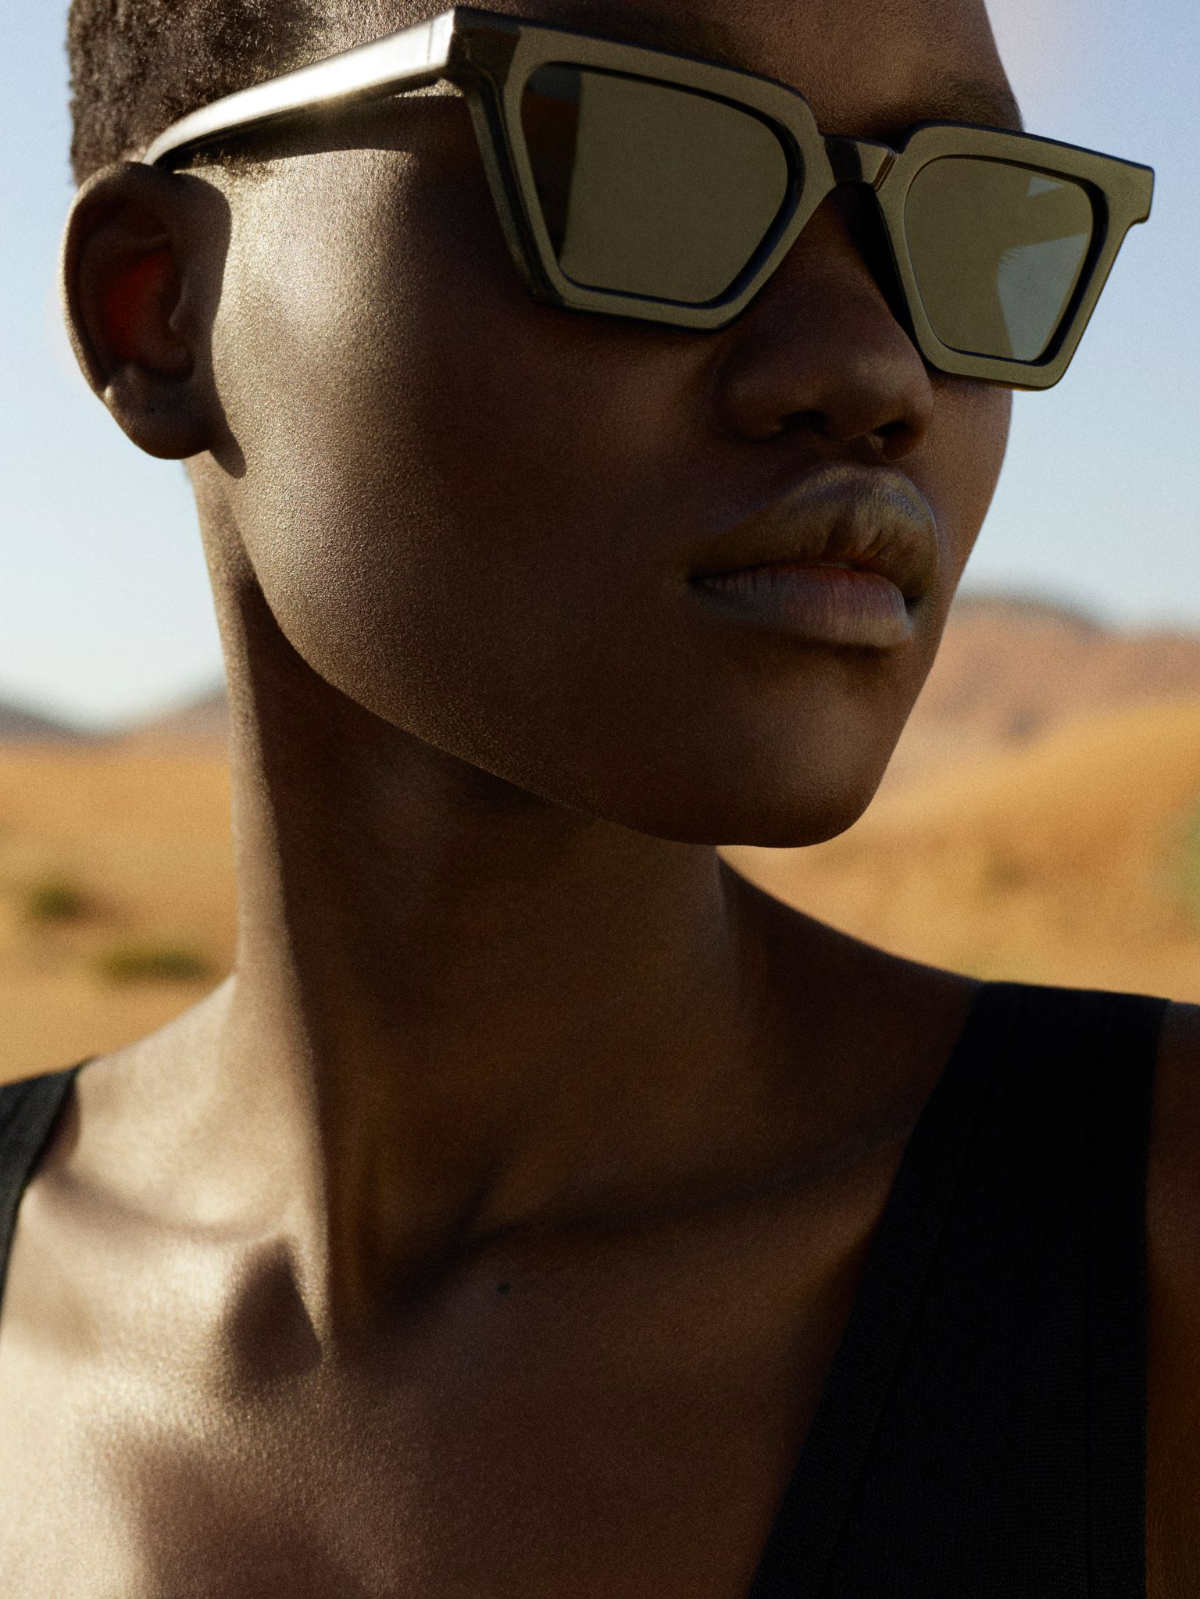 COS Presents Its Vision For SS 2021 And Launches Circular COS X Yuma Labs Sunglasses Collaboration